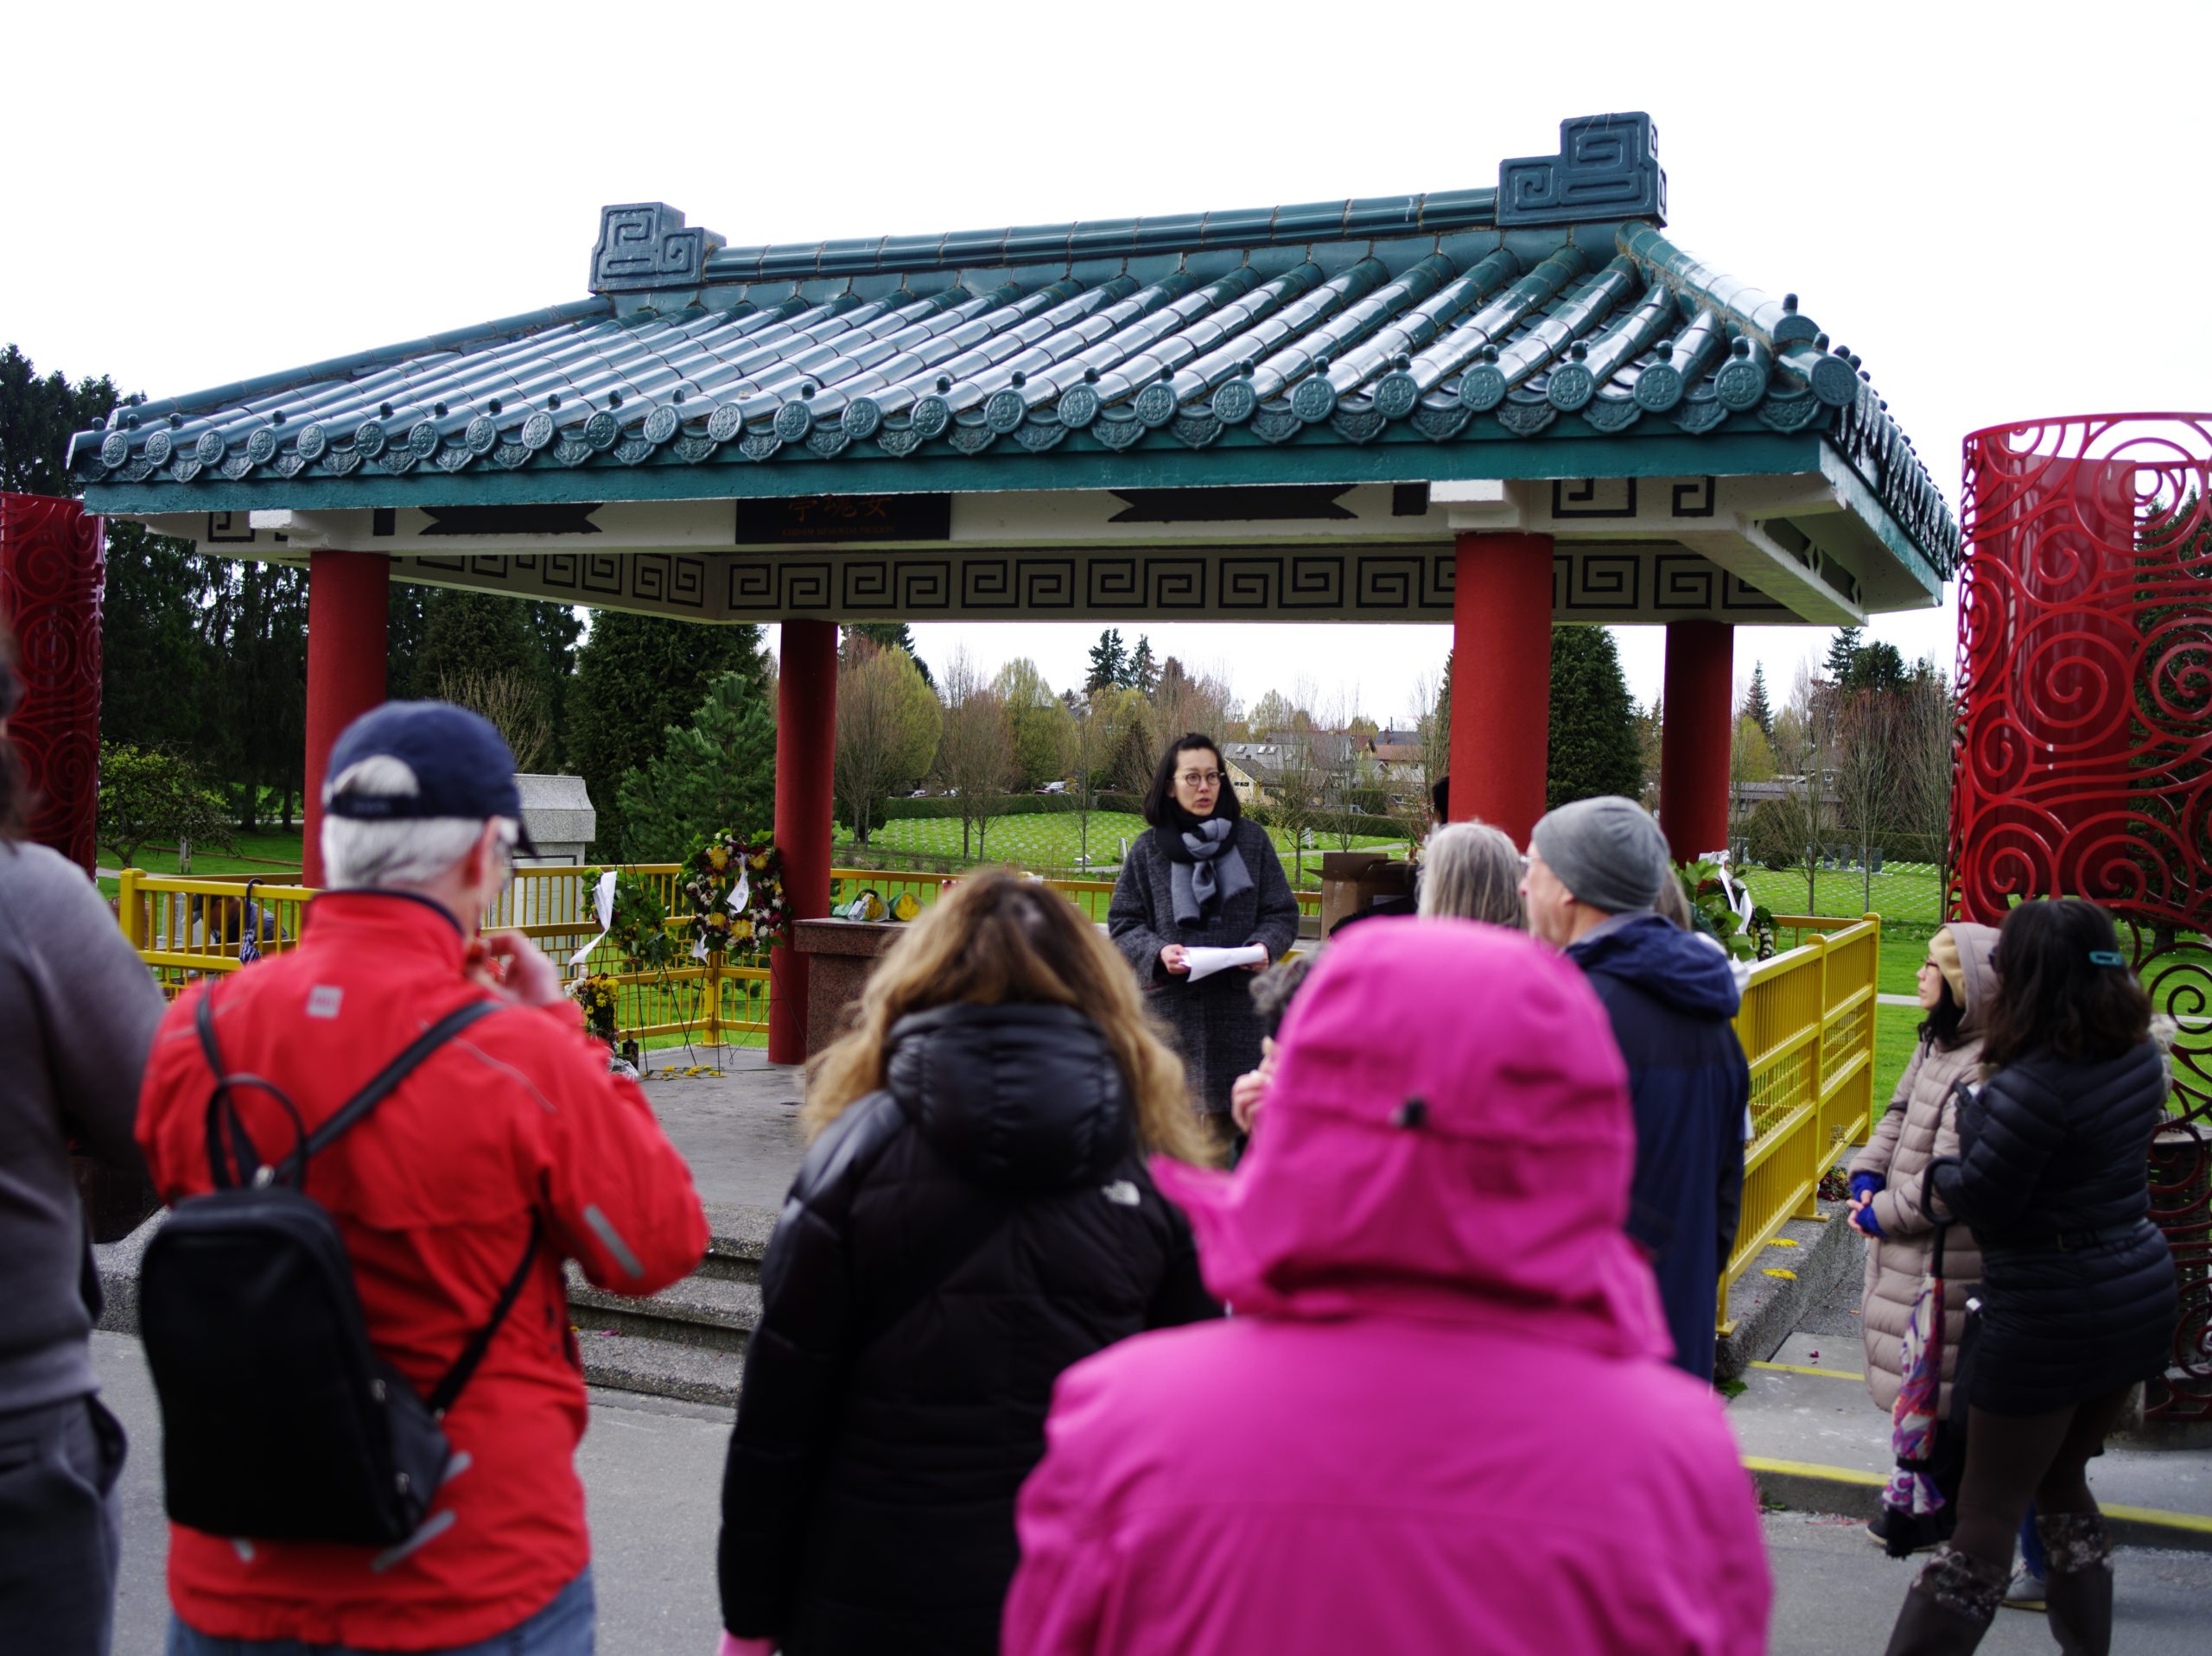 Image Description: A person stands in the north east corner of the Chinese Pavilion at Mountain View Cemetery. They have shoulder length black hair, with their bangs pulled back away from their face. They are reading welcome notes from a notepad they are holding in their hands. The pavilion roof is held up by four round brightly painted pillars. There are black and white designs on the inside of the roof. Shiny, decorative cylindrical burners featuring a round swirly pattern are on either side of the pavilion. People are facing the pavilion, looking at the person holding the notepad.